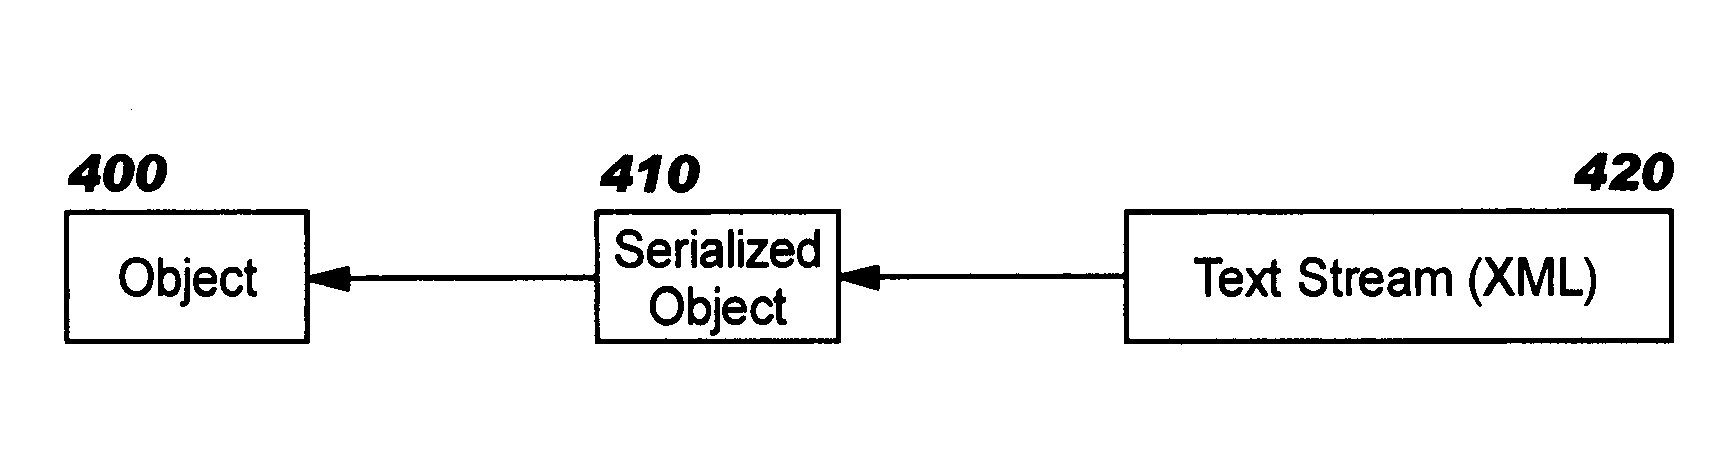 Serialization and preservation of objects